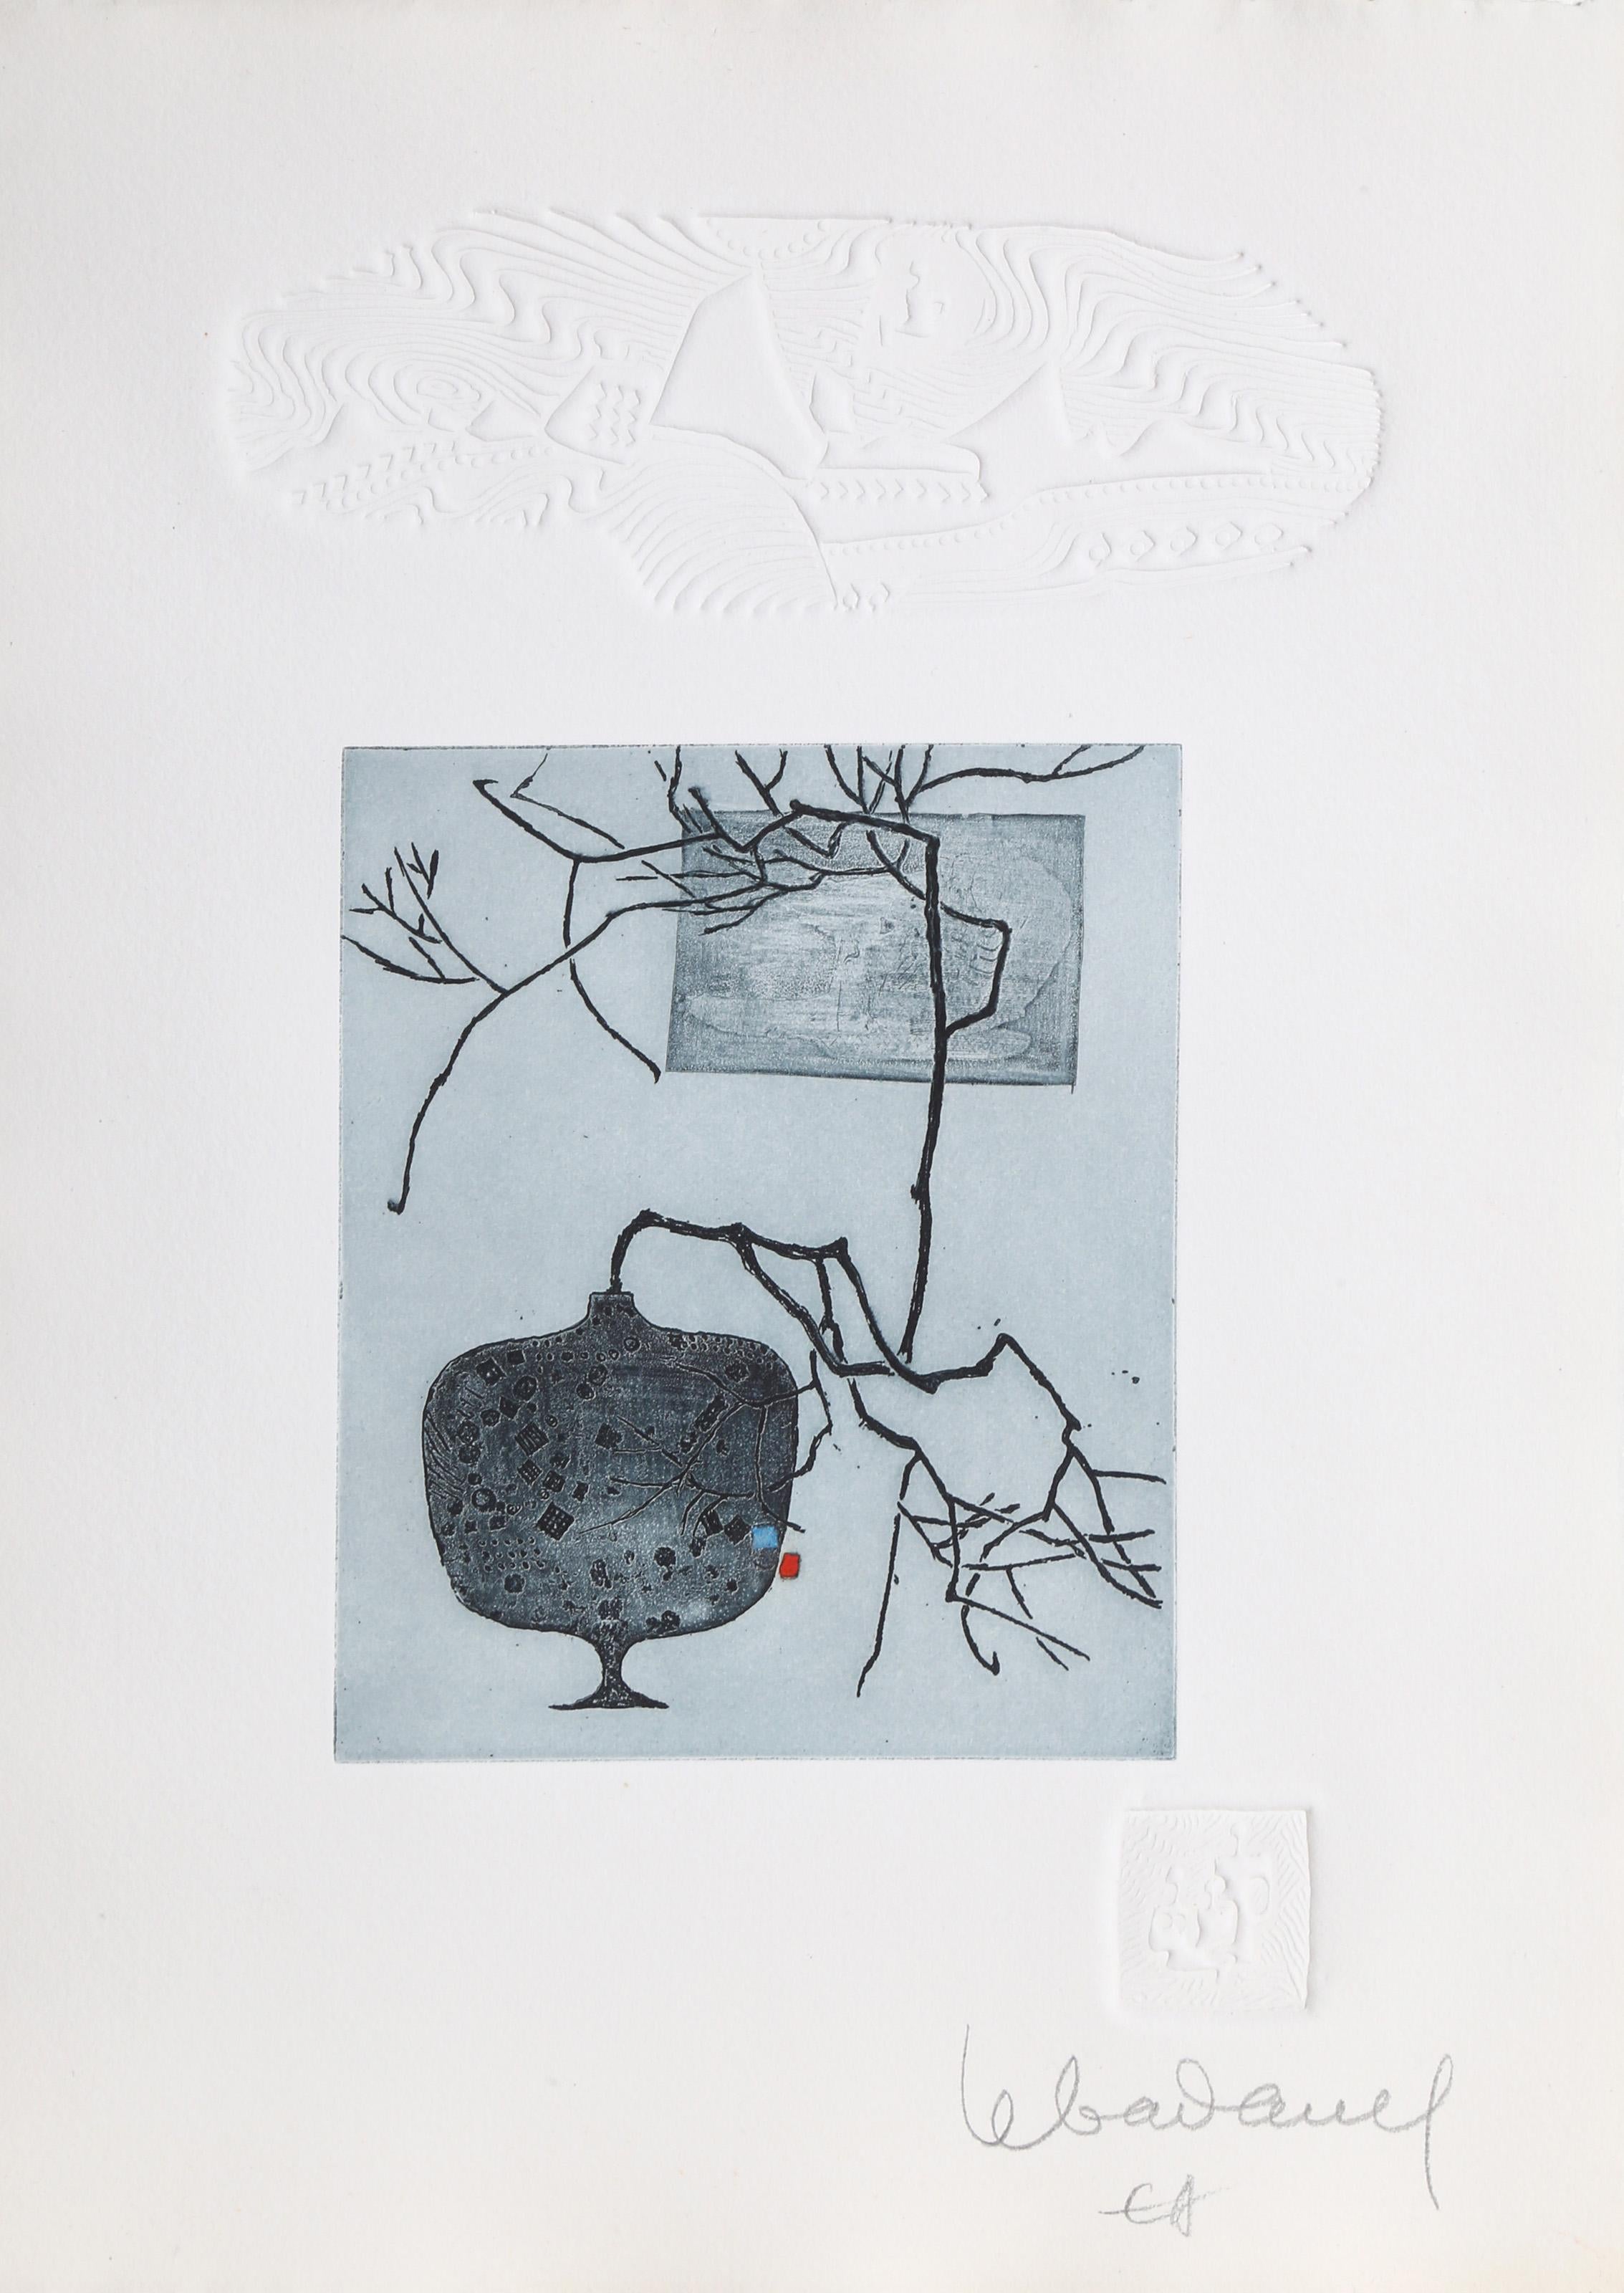 Lebadang (aka Hoi), Vietnamese (1922 - 2015) -  Tree in Interior. Year: 1982, Medium: Etching with Relief, signed and numbered in pencil, Edition: EA, Size: 14  x 10 in. (35.56  x 25.4 cm) 